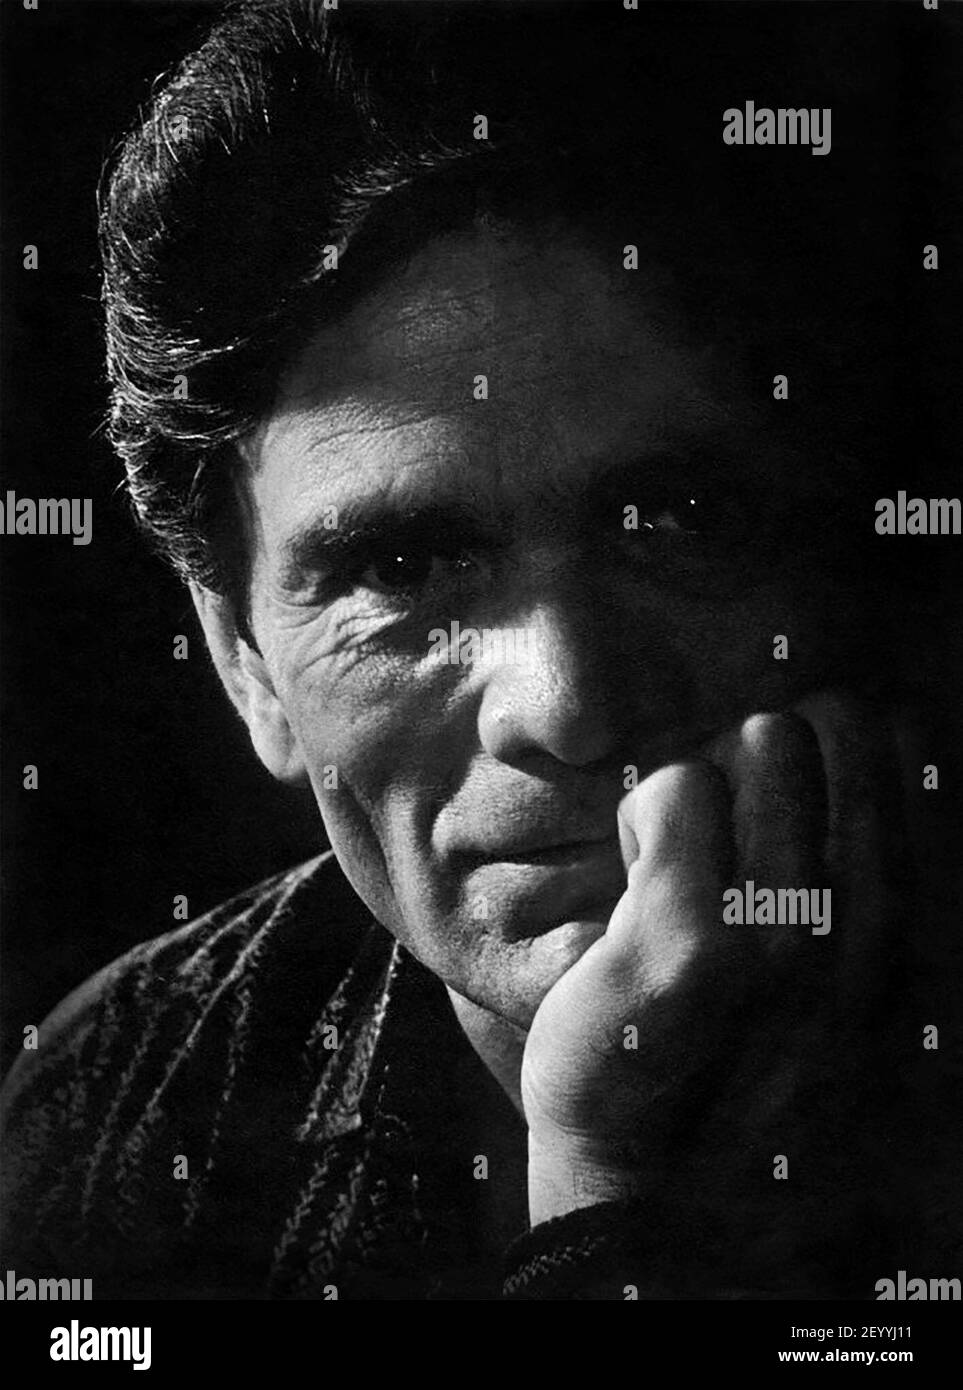 Pier paolo pasolini portrait hi-res stock photography and images - Alamy